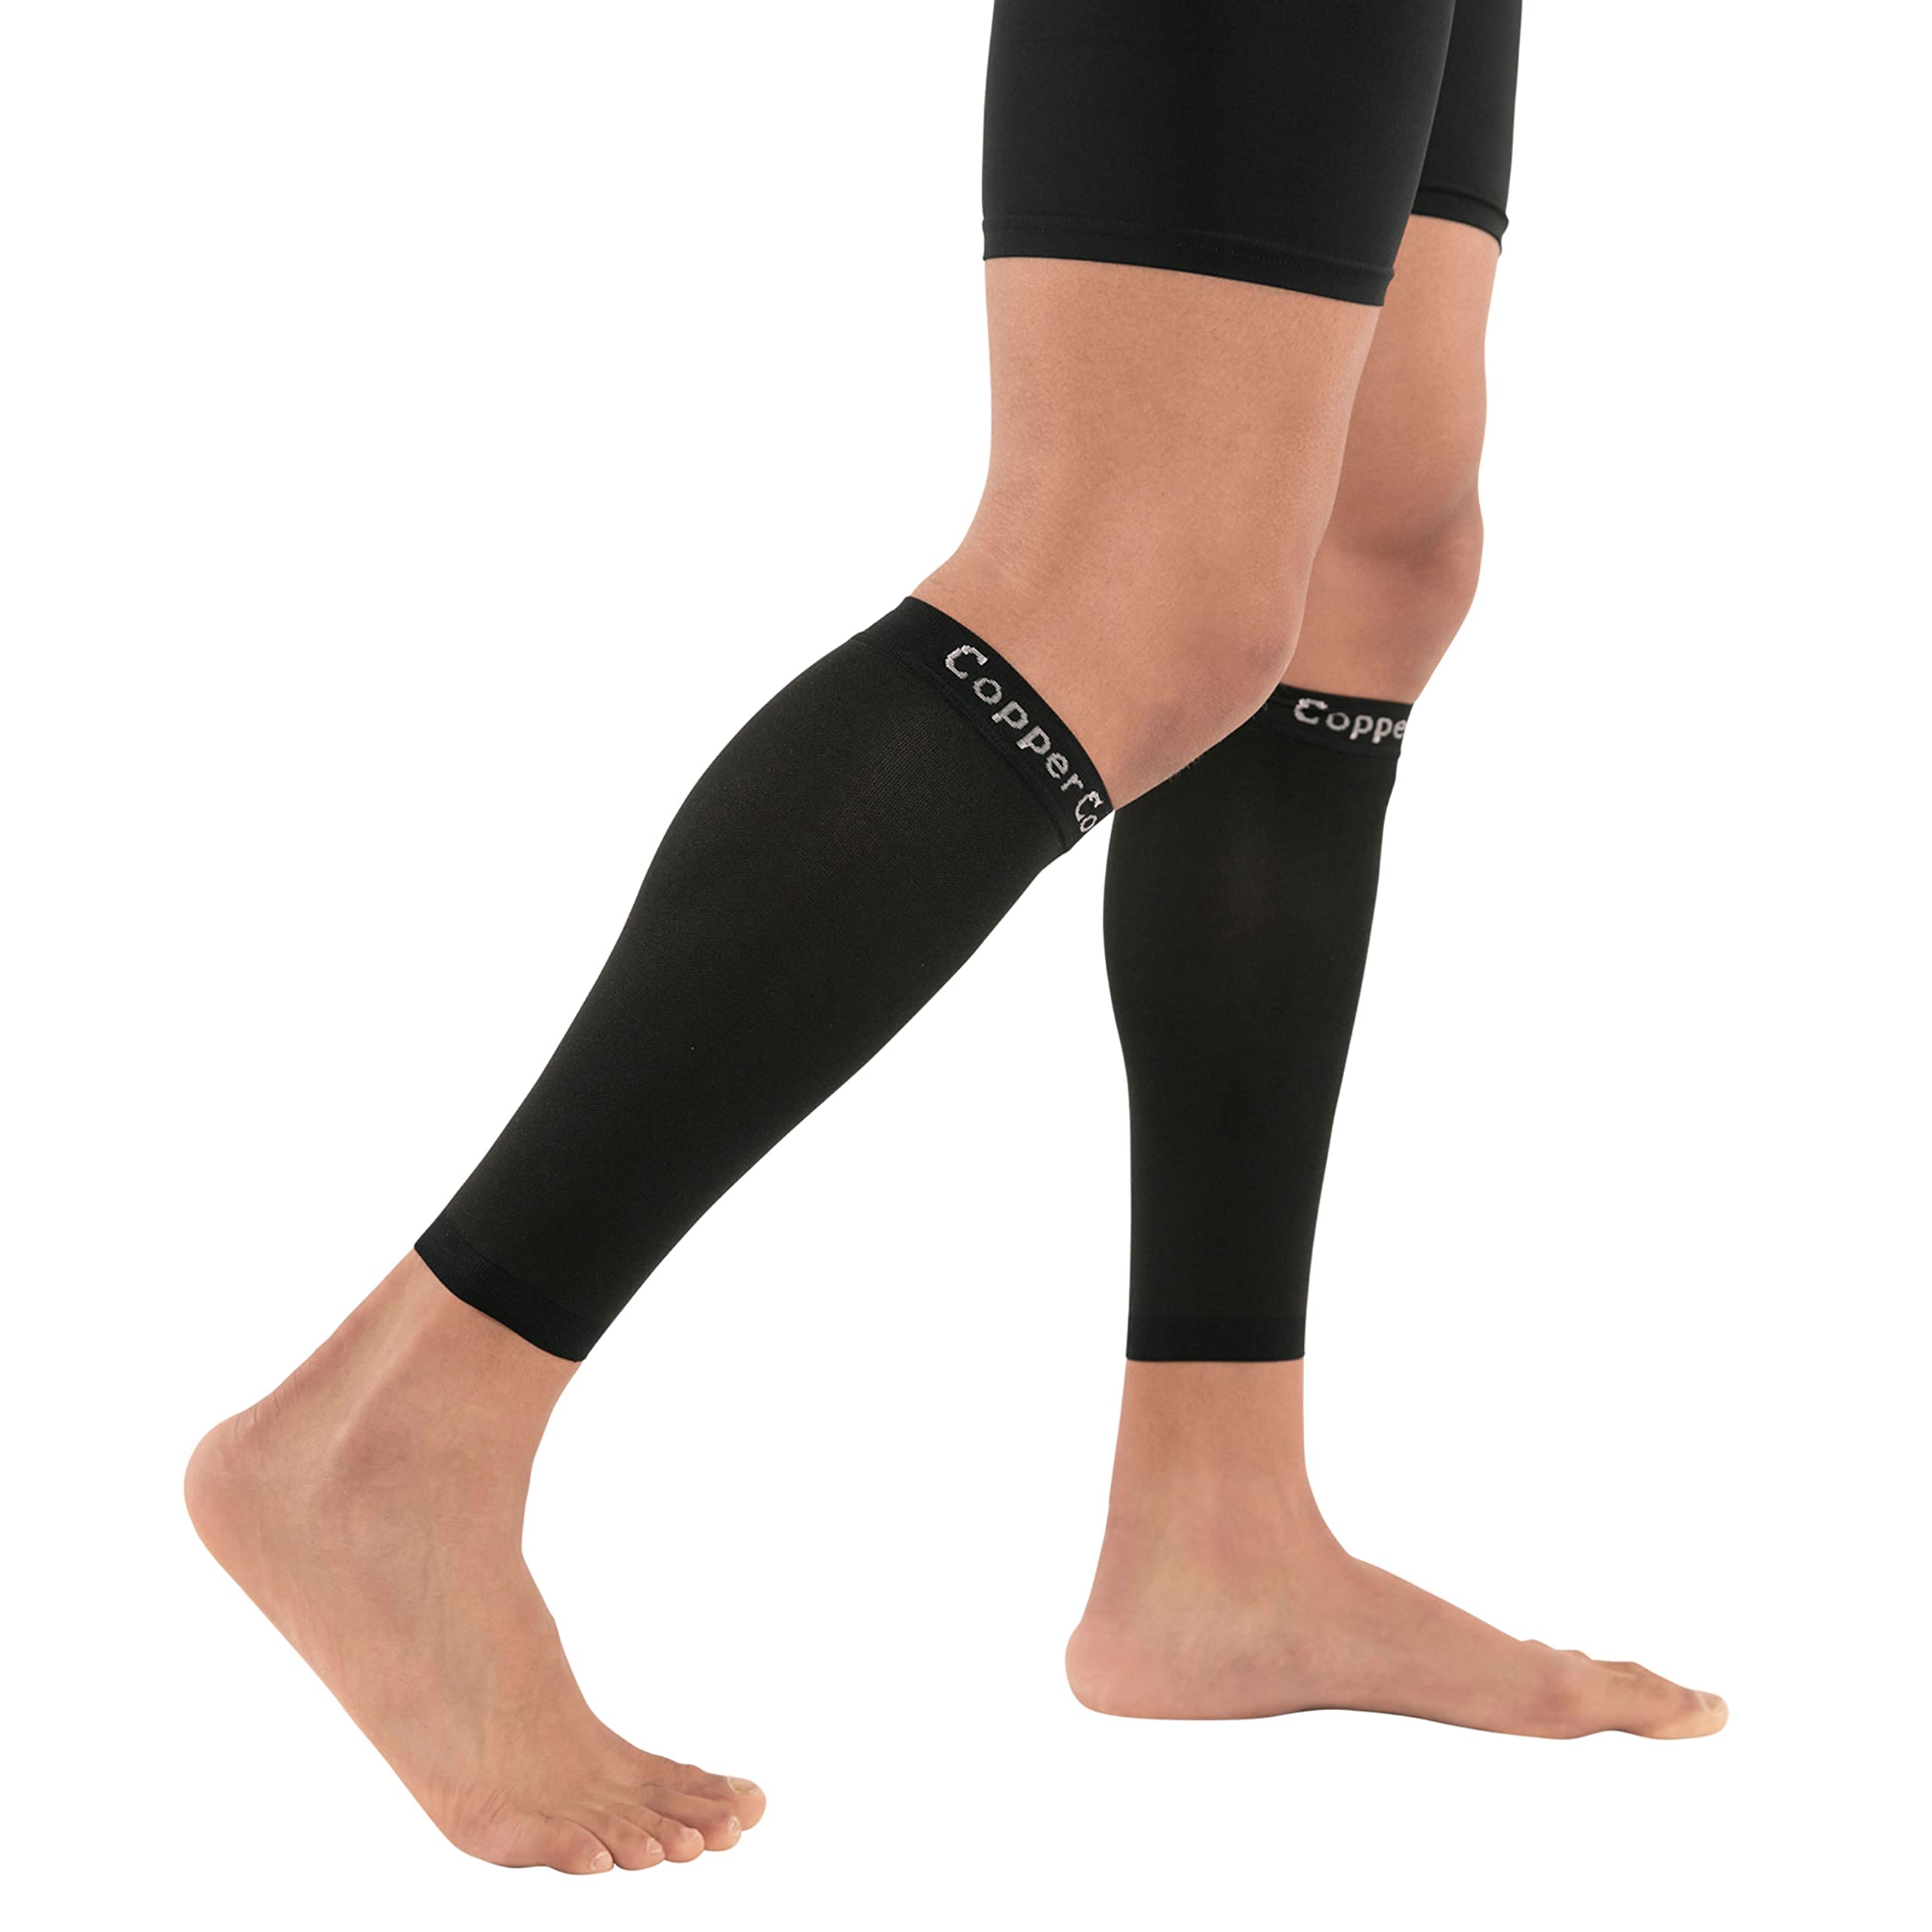 Copper Compression Calf Sleeves - Footless Compression Socks for Running,  Cycling, & Fitness. Support and Relief from Shin Splints, Varicose Veins,  Sore Muscles + Joints, Sprains, Strains (1 PAIR - M) Medium (1 Pair)